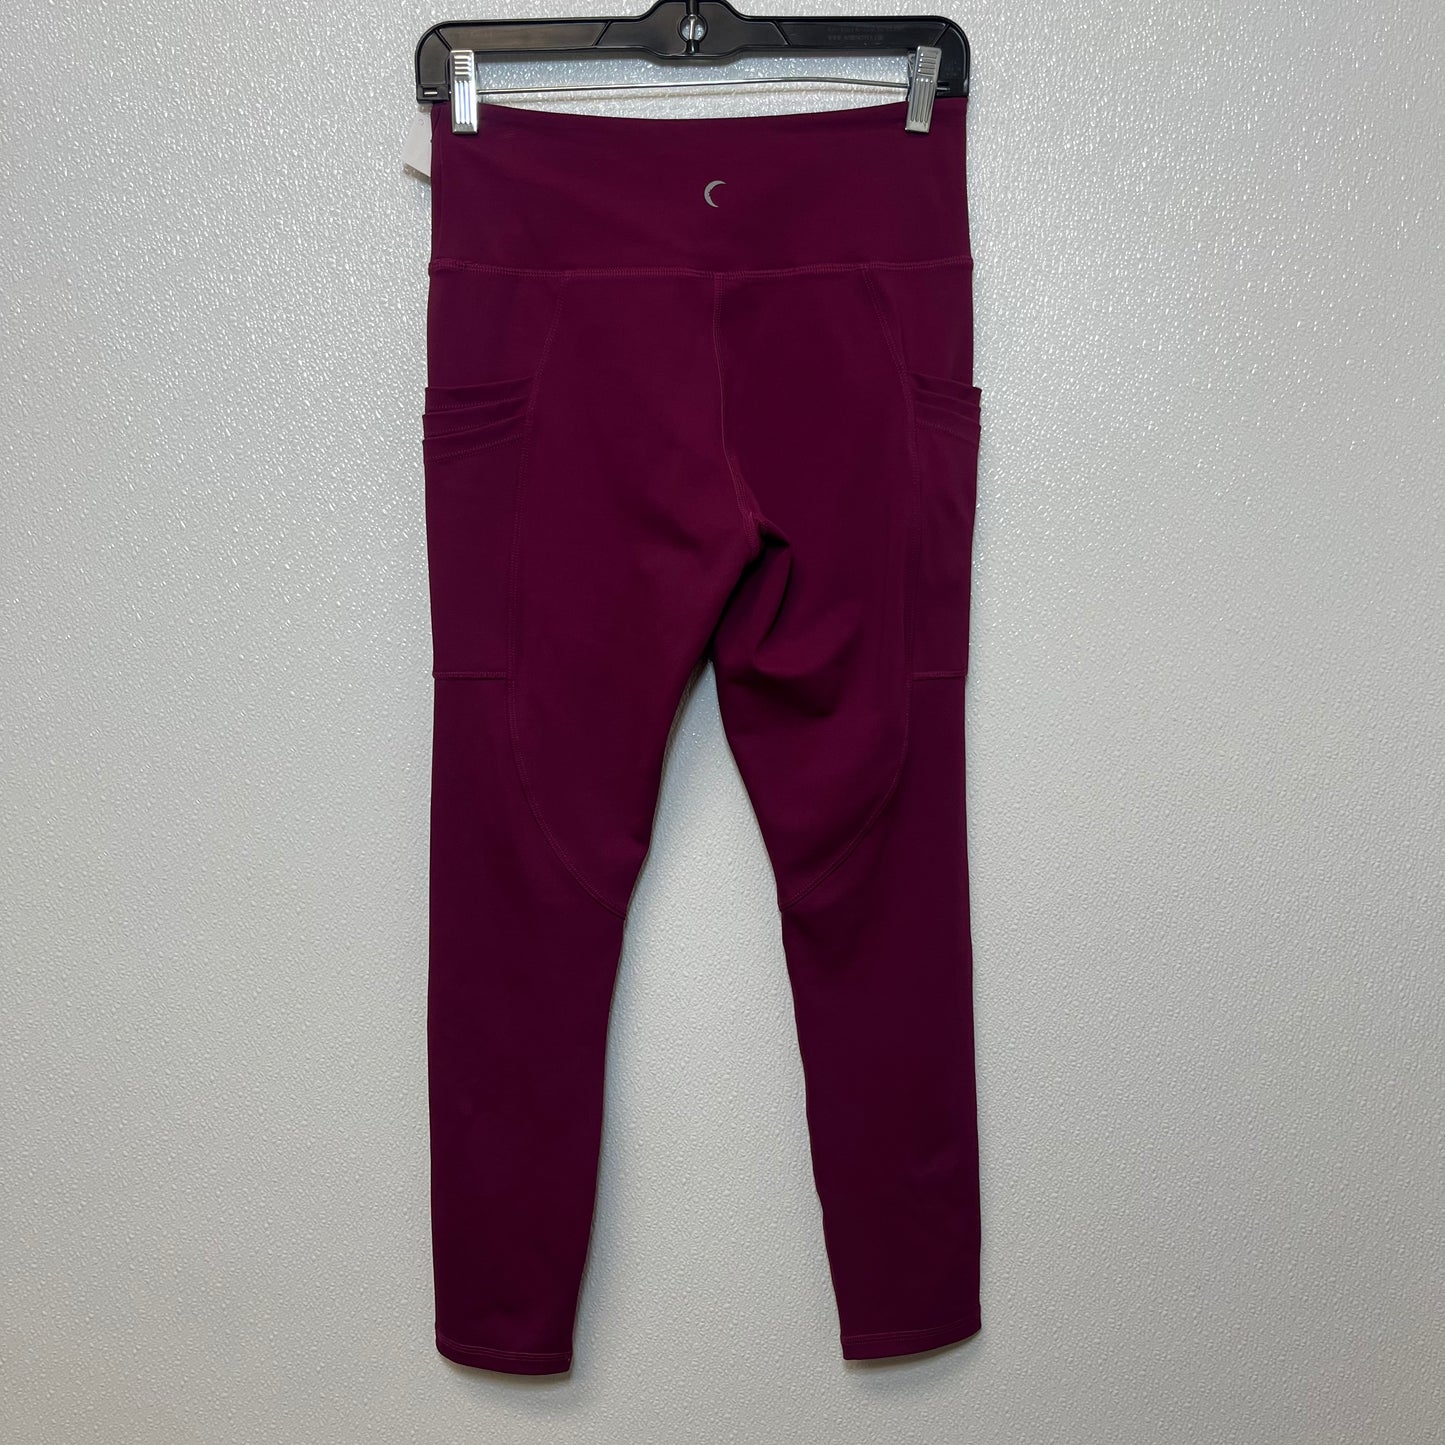 Athletic Leggings By Zyia  Size: 6